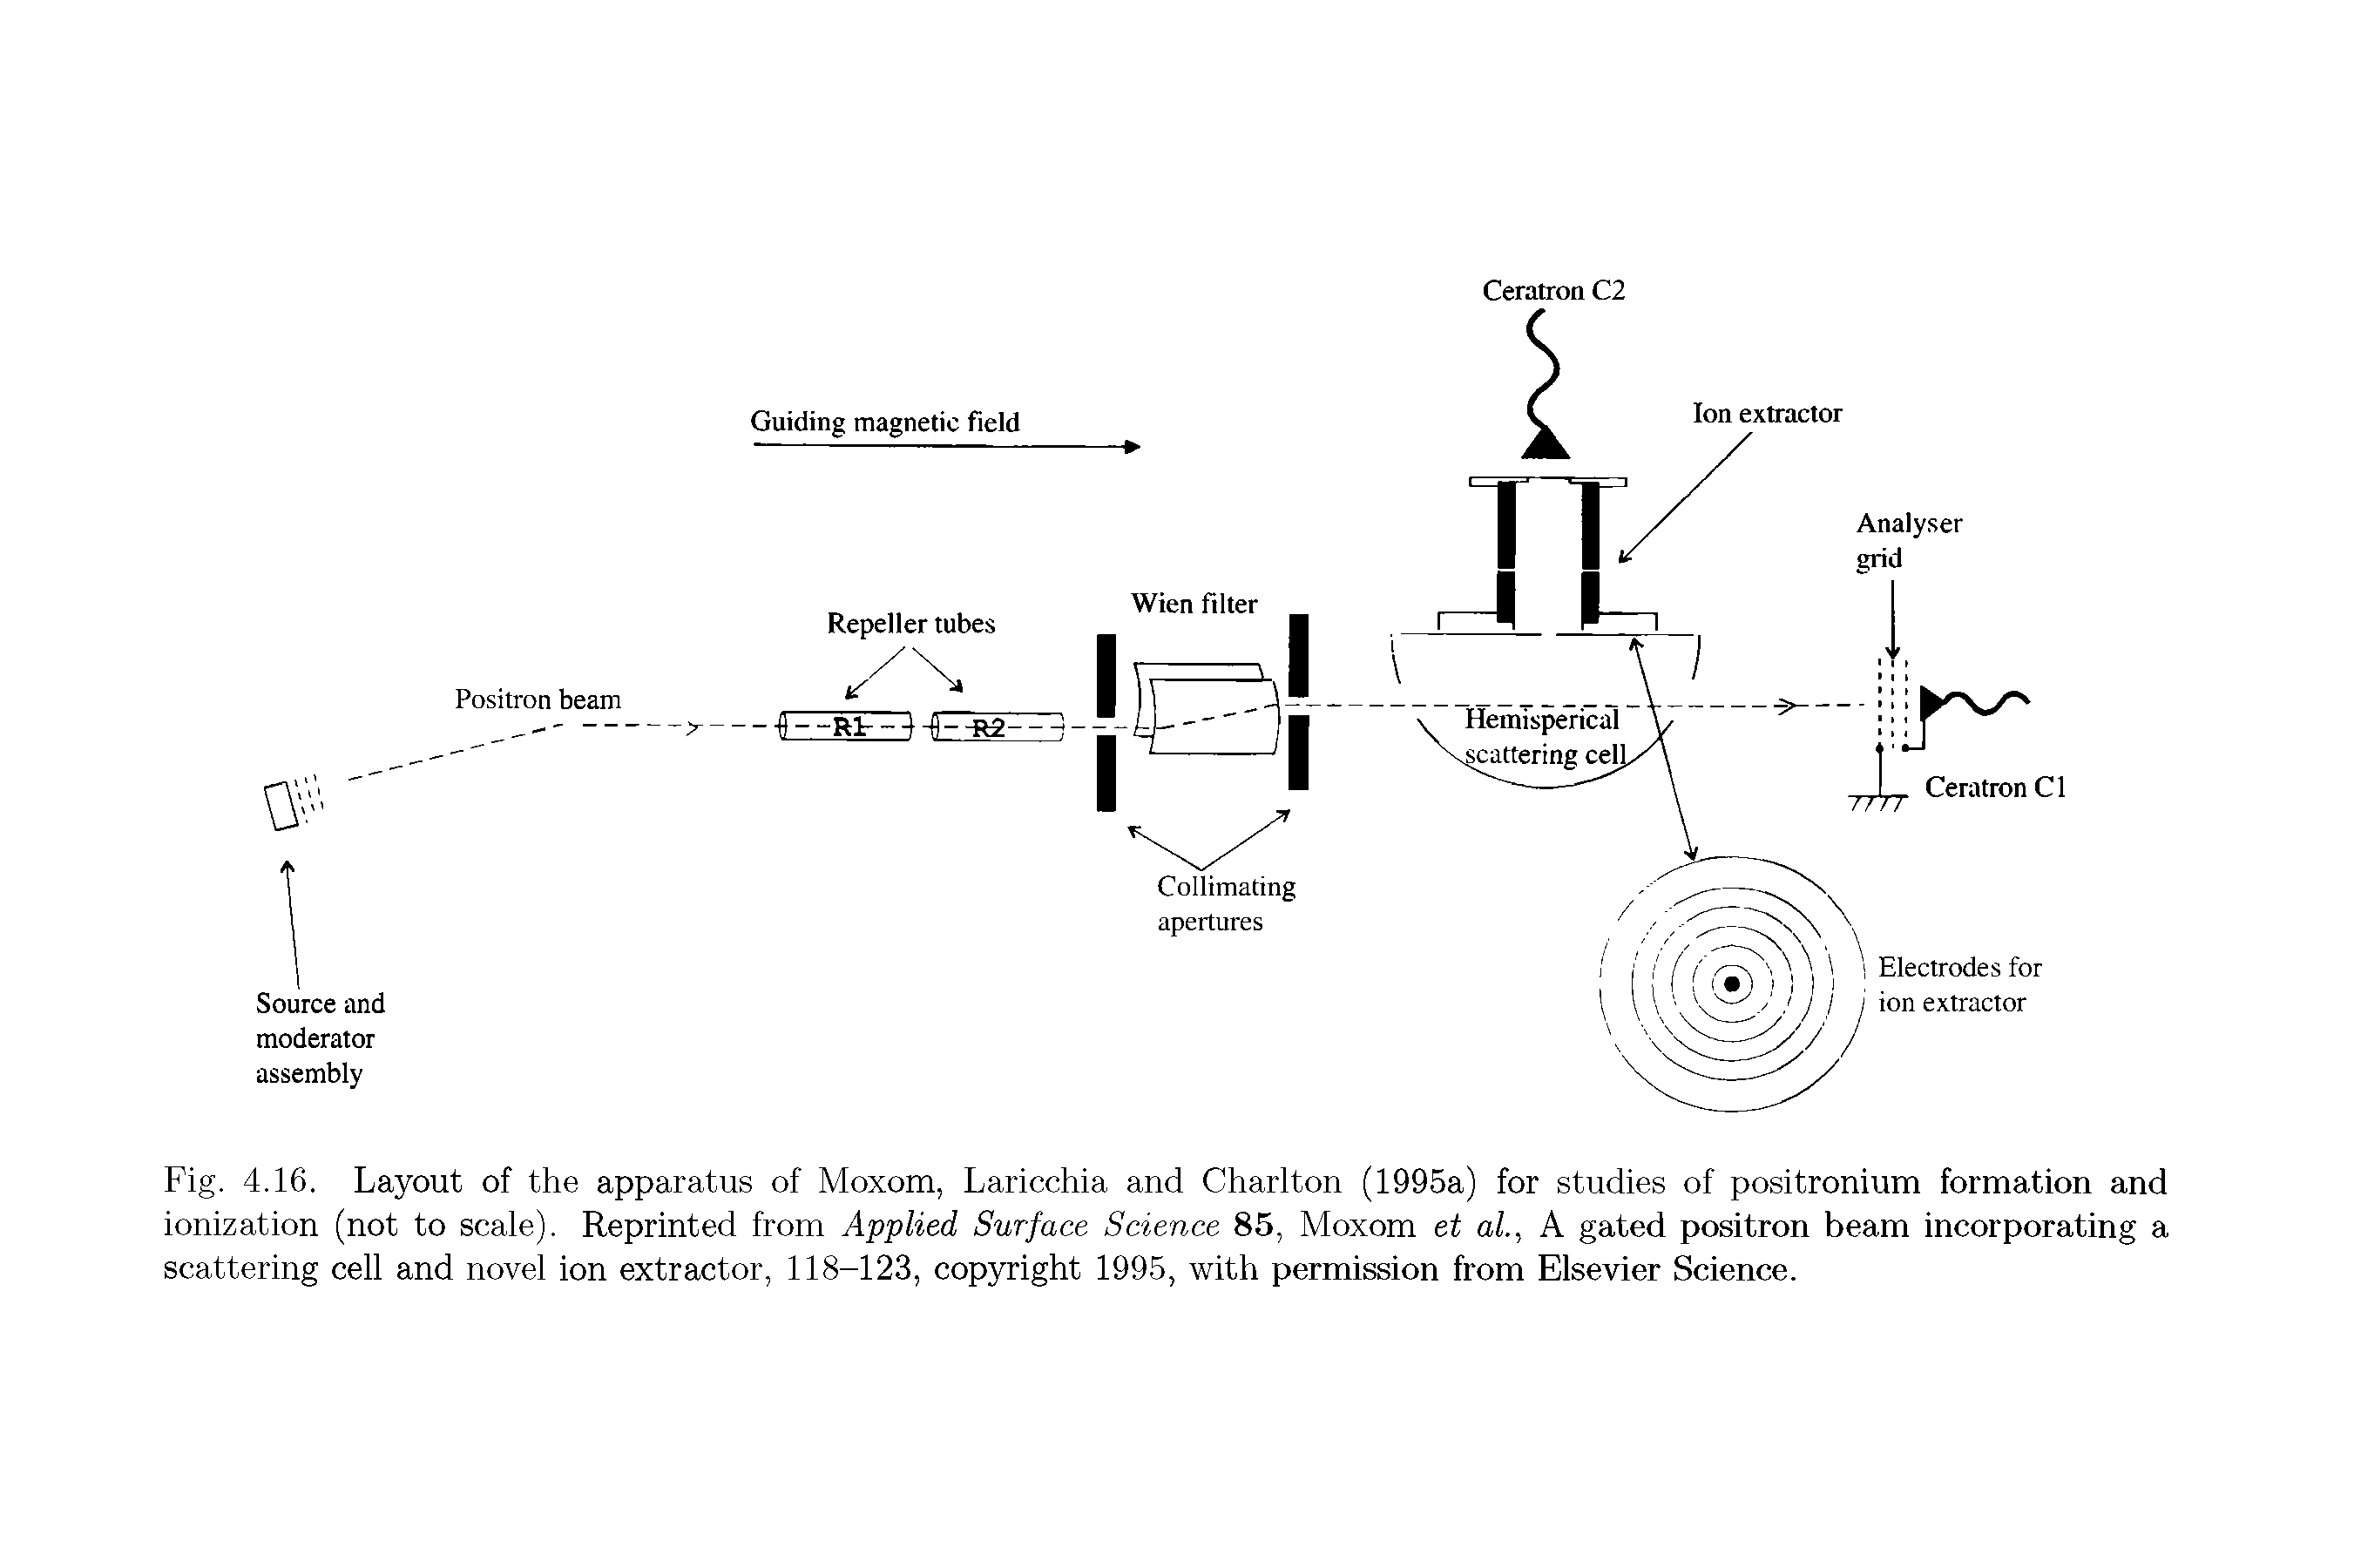 Fig. 4.16. Layout of the apparatus of Moxom, Laricchia and Charlton (1995a) for studies of positronium formation and ionization (not to scale). Reprinted from Applied Surface Science 85, Moxom et al, A gated positron beam incorporating a scattering cell and novel ion extractor, 118-123, copyright 1995, with permission from Elsevier Science.